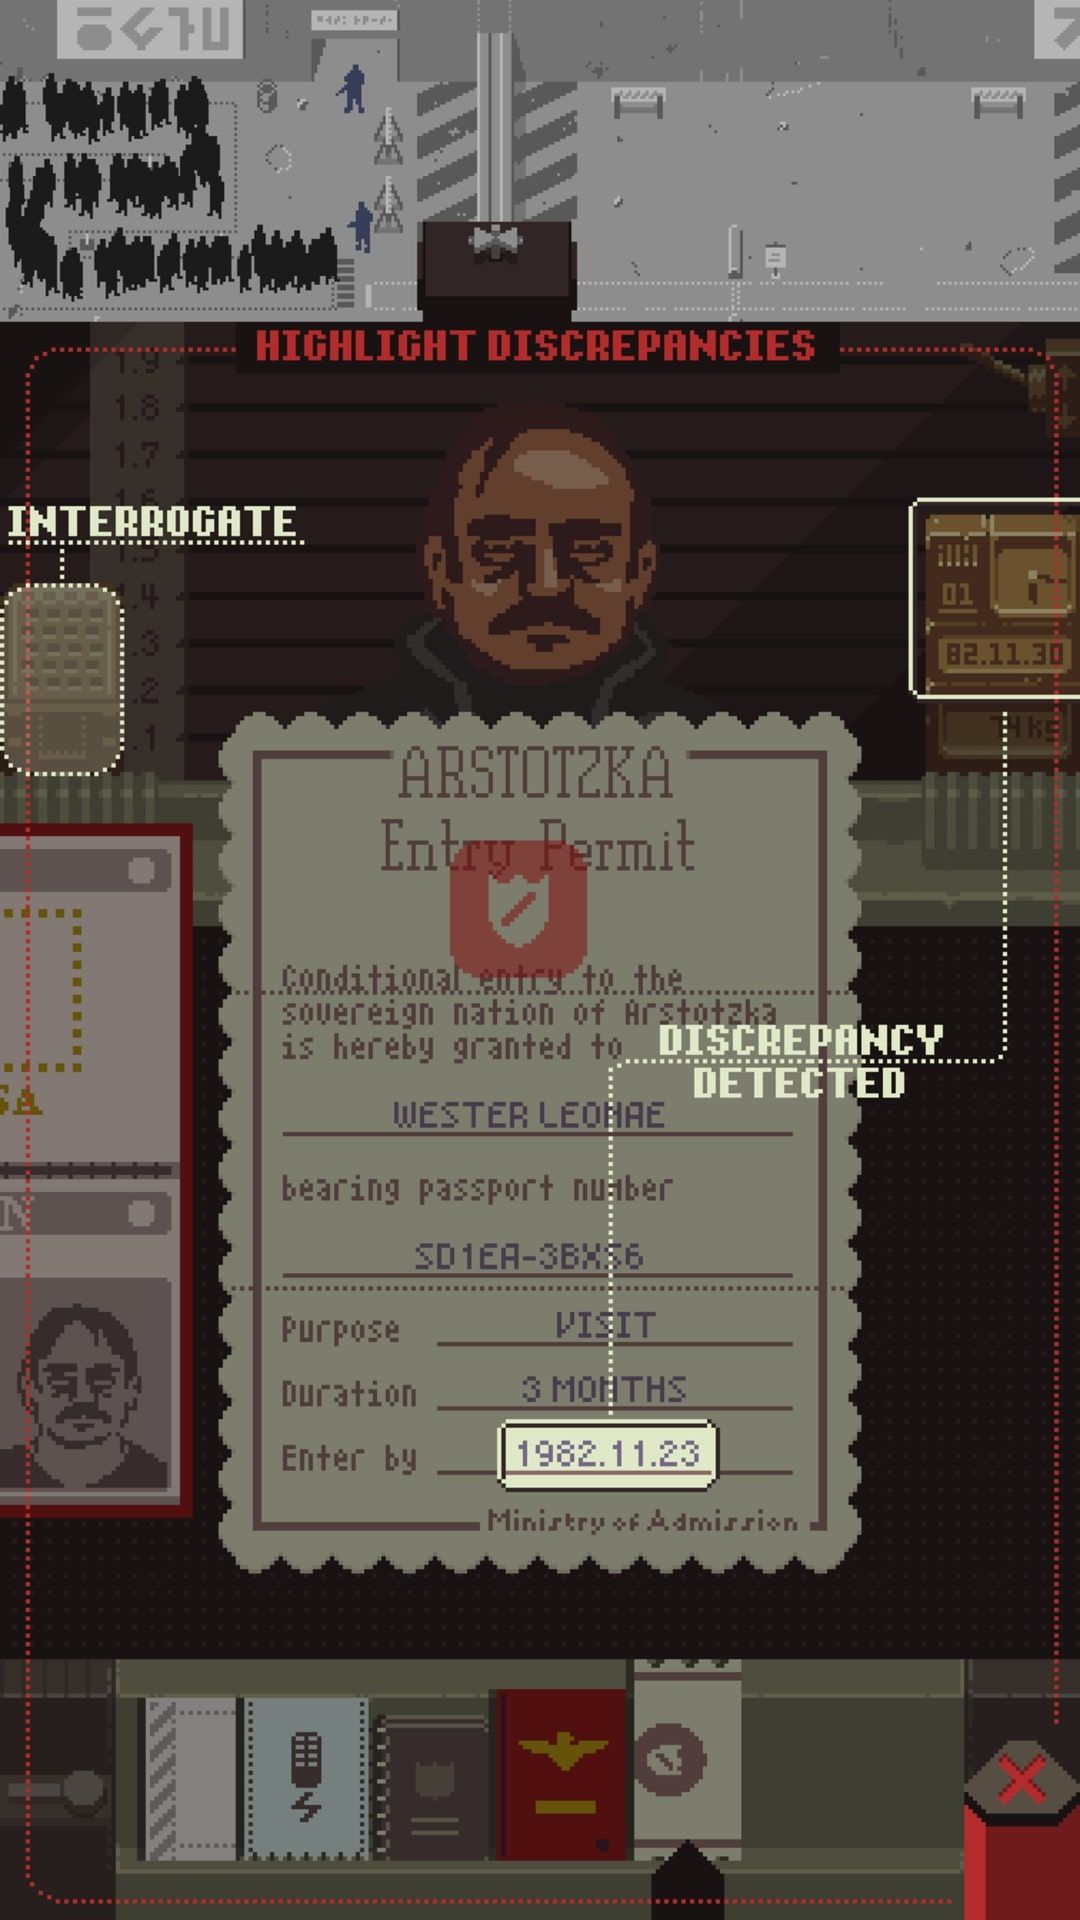 best-pixel-art-games-on-android-papers-please-entry-permit